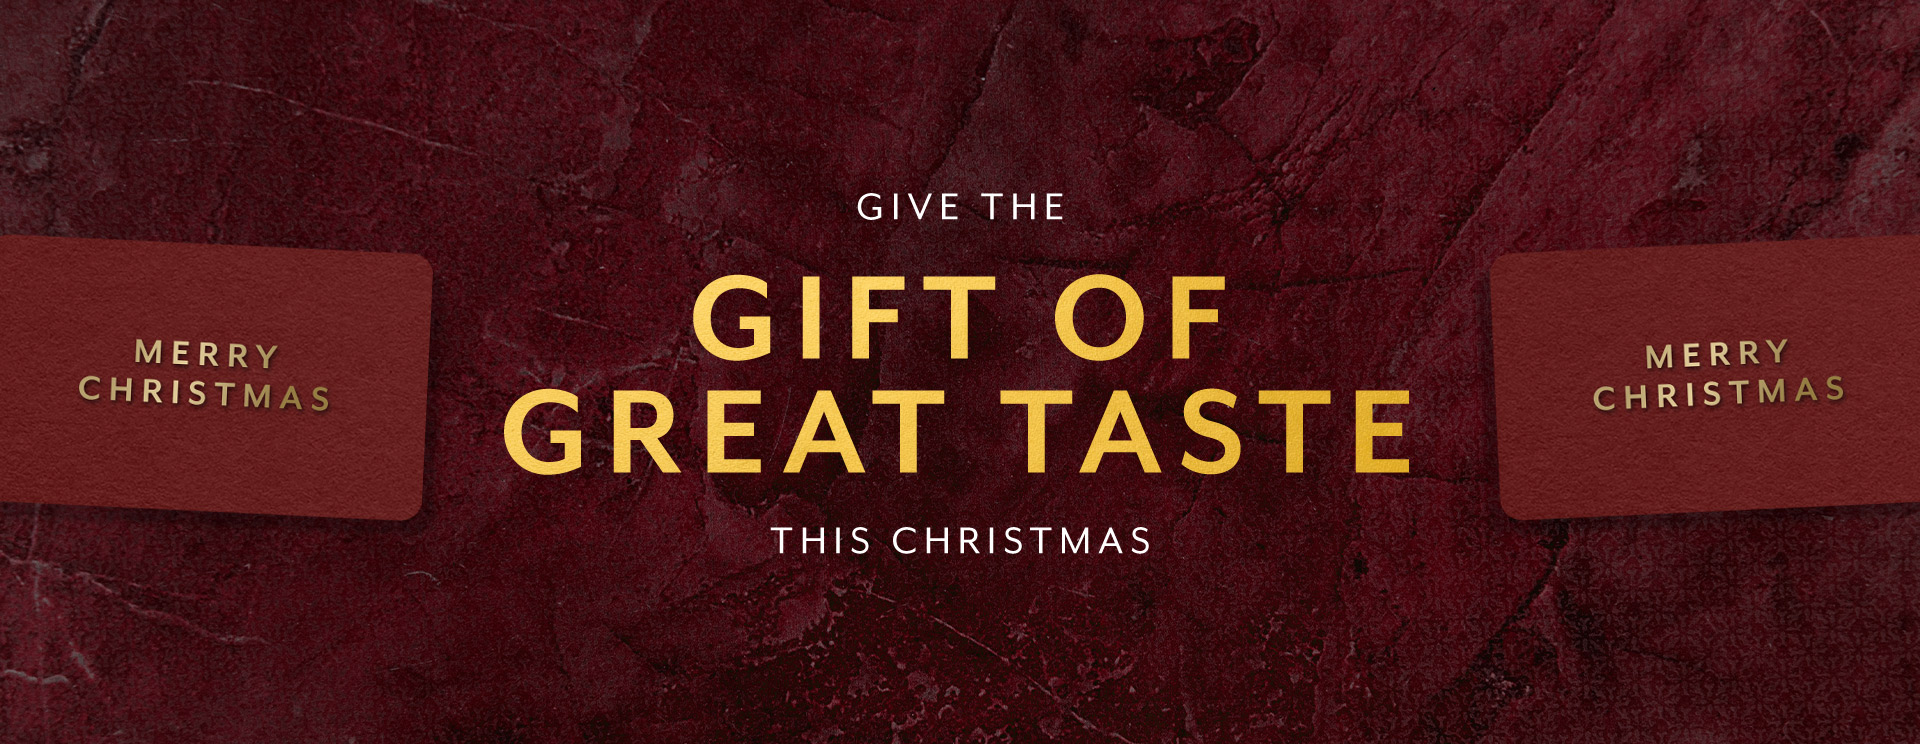 Give the gift of a gift card at The Dukes Head